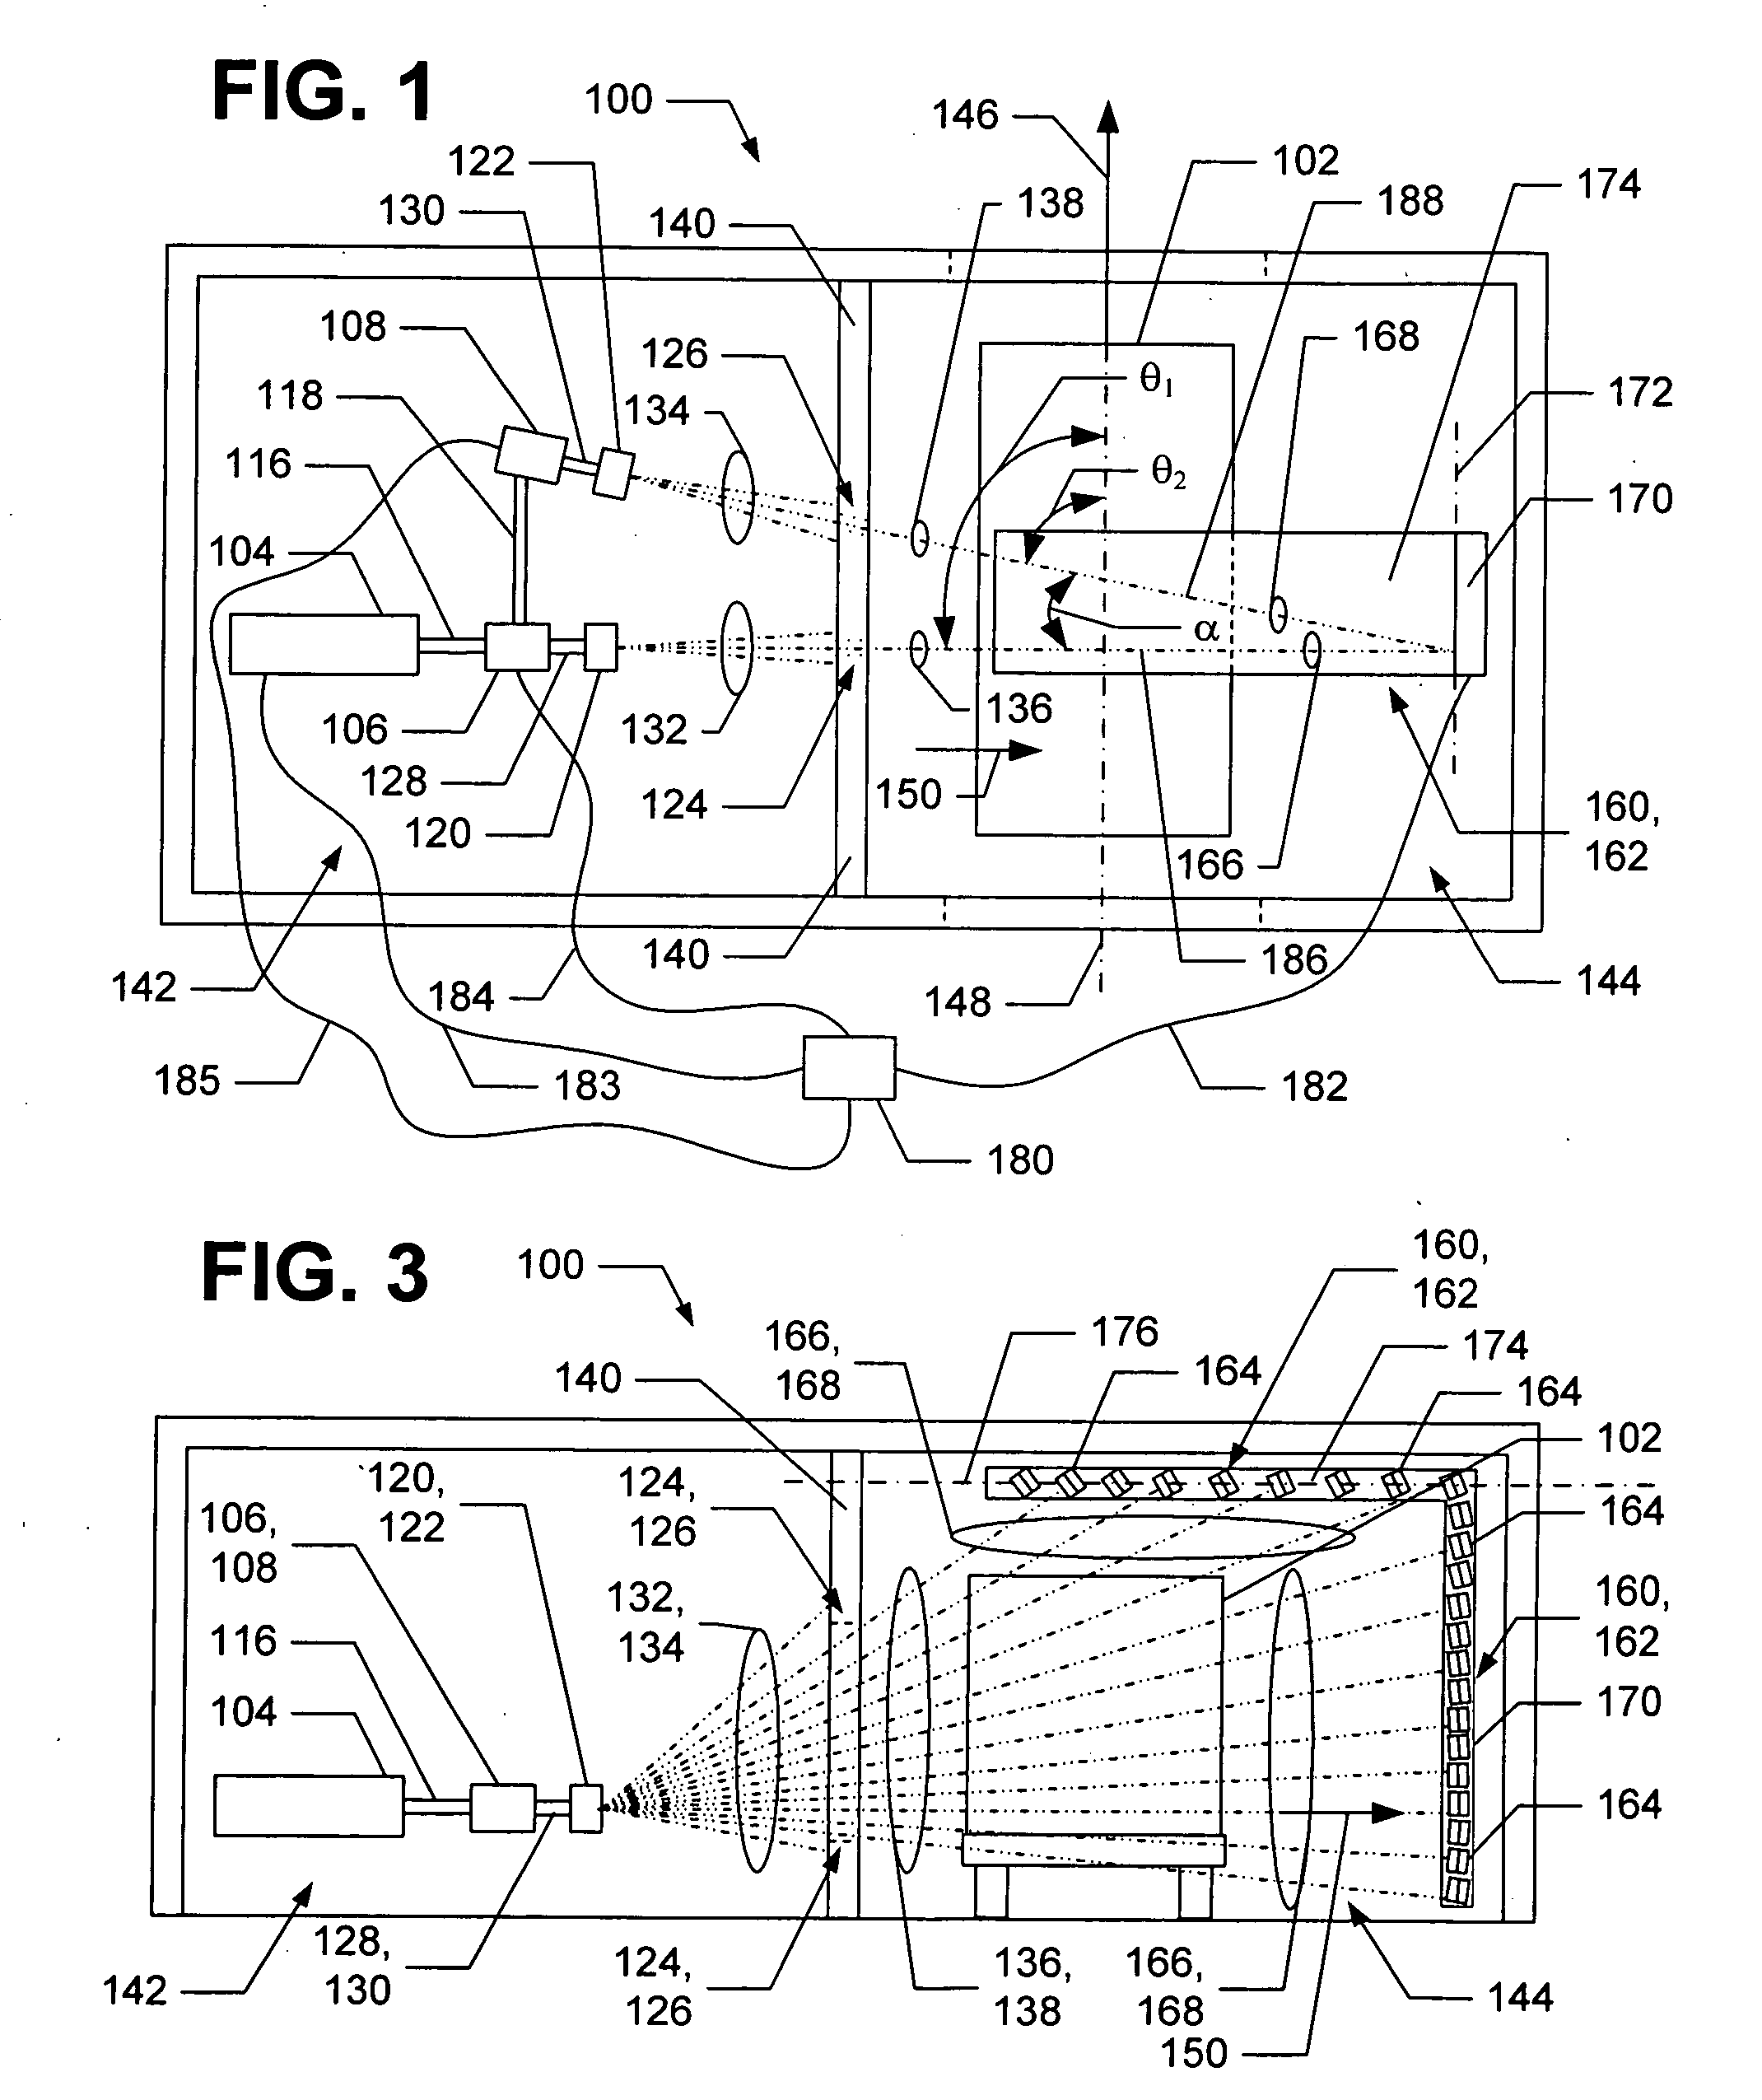 Angled-beam detection system for container inspection